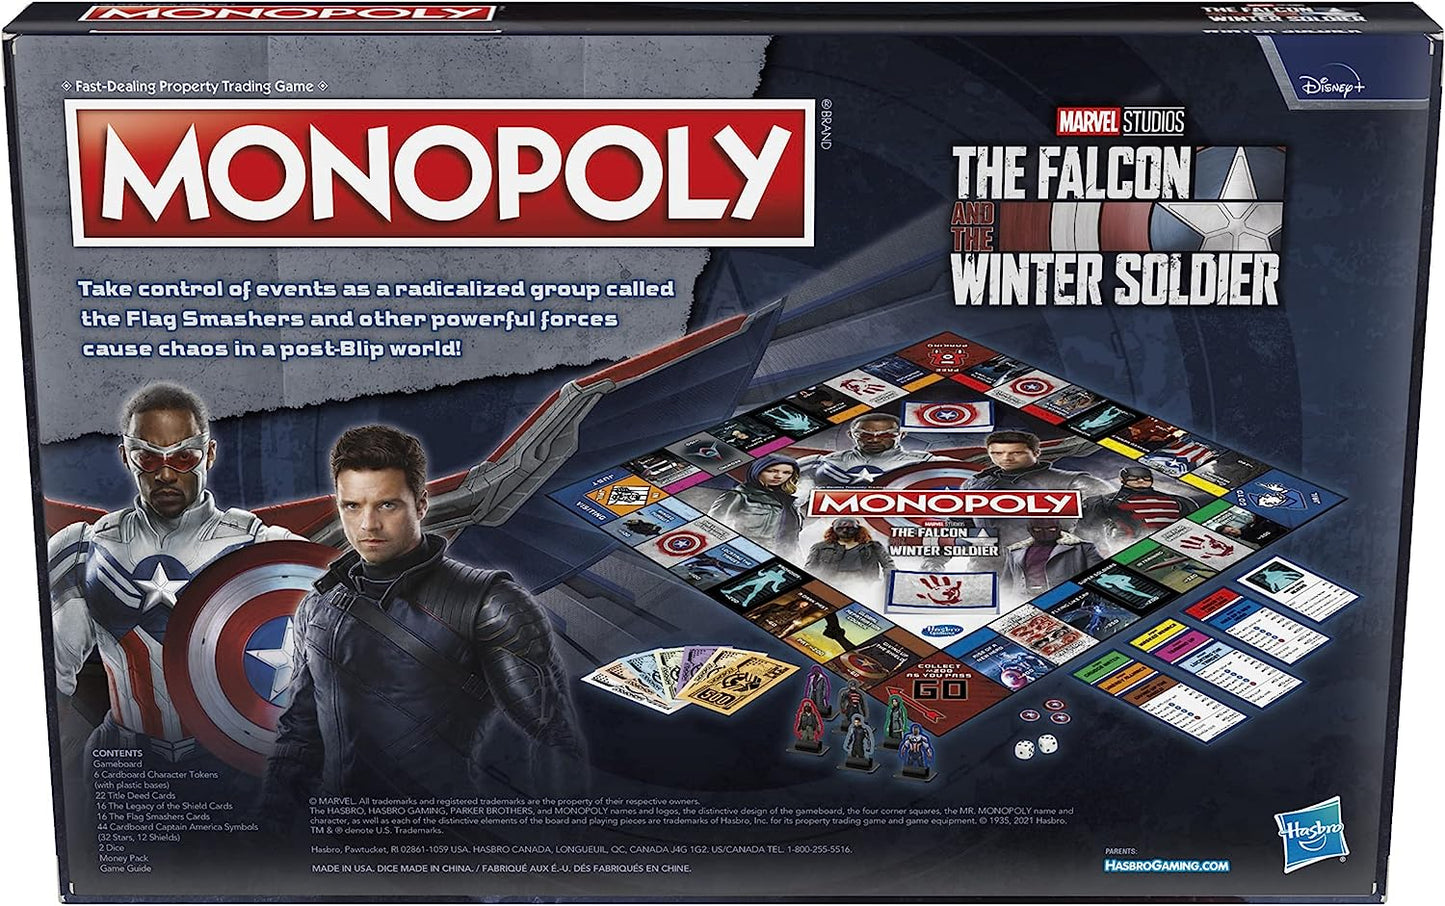 MONOPOLY FALCON AND WINTER SOLDIER